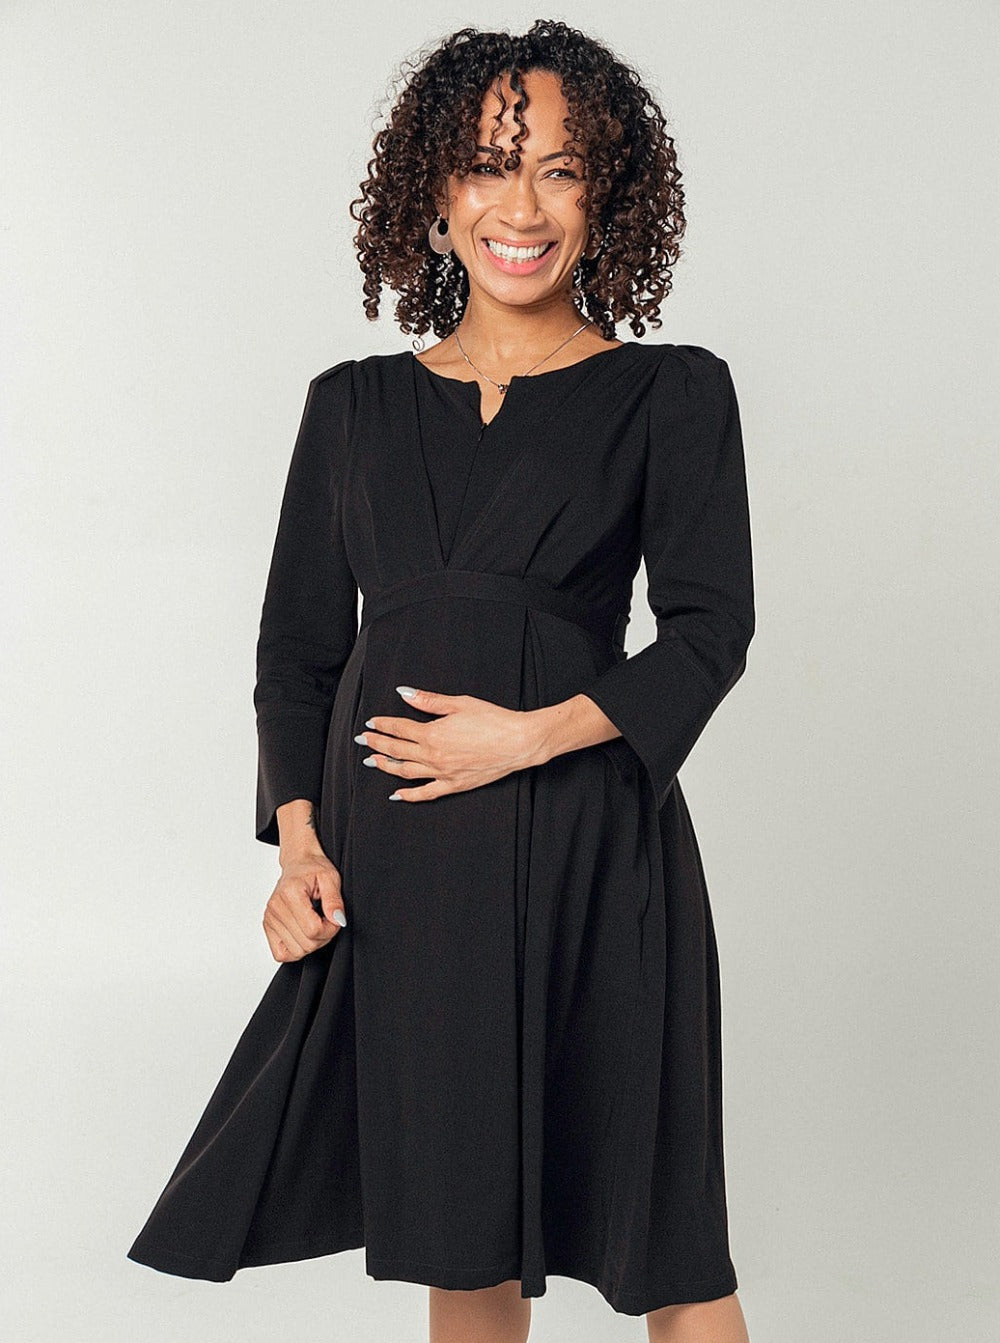 Black maternity and breastfeeding dress by MARION. Sustainable TENCEL empire waist style with deep pockets and full feminine skirt. Breastfeeding friendly with 3/4 sleeves and elegant cuff detail. Petite sizing also available.